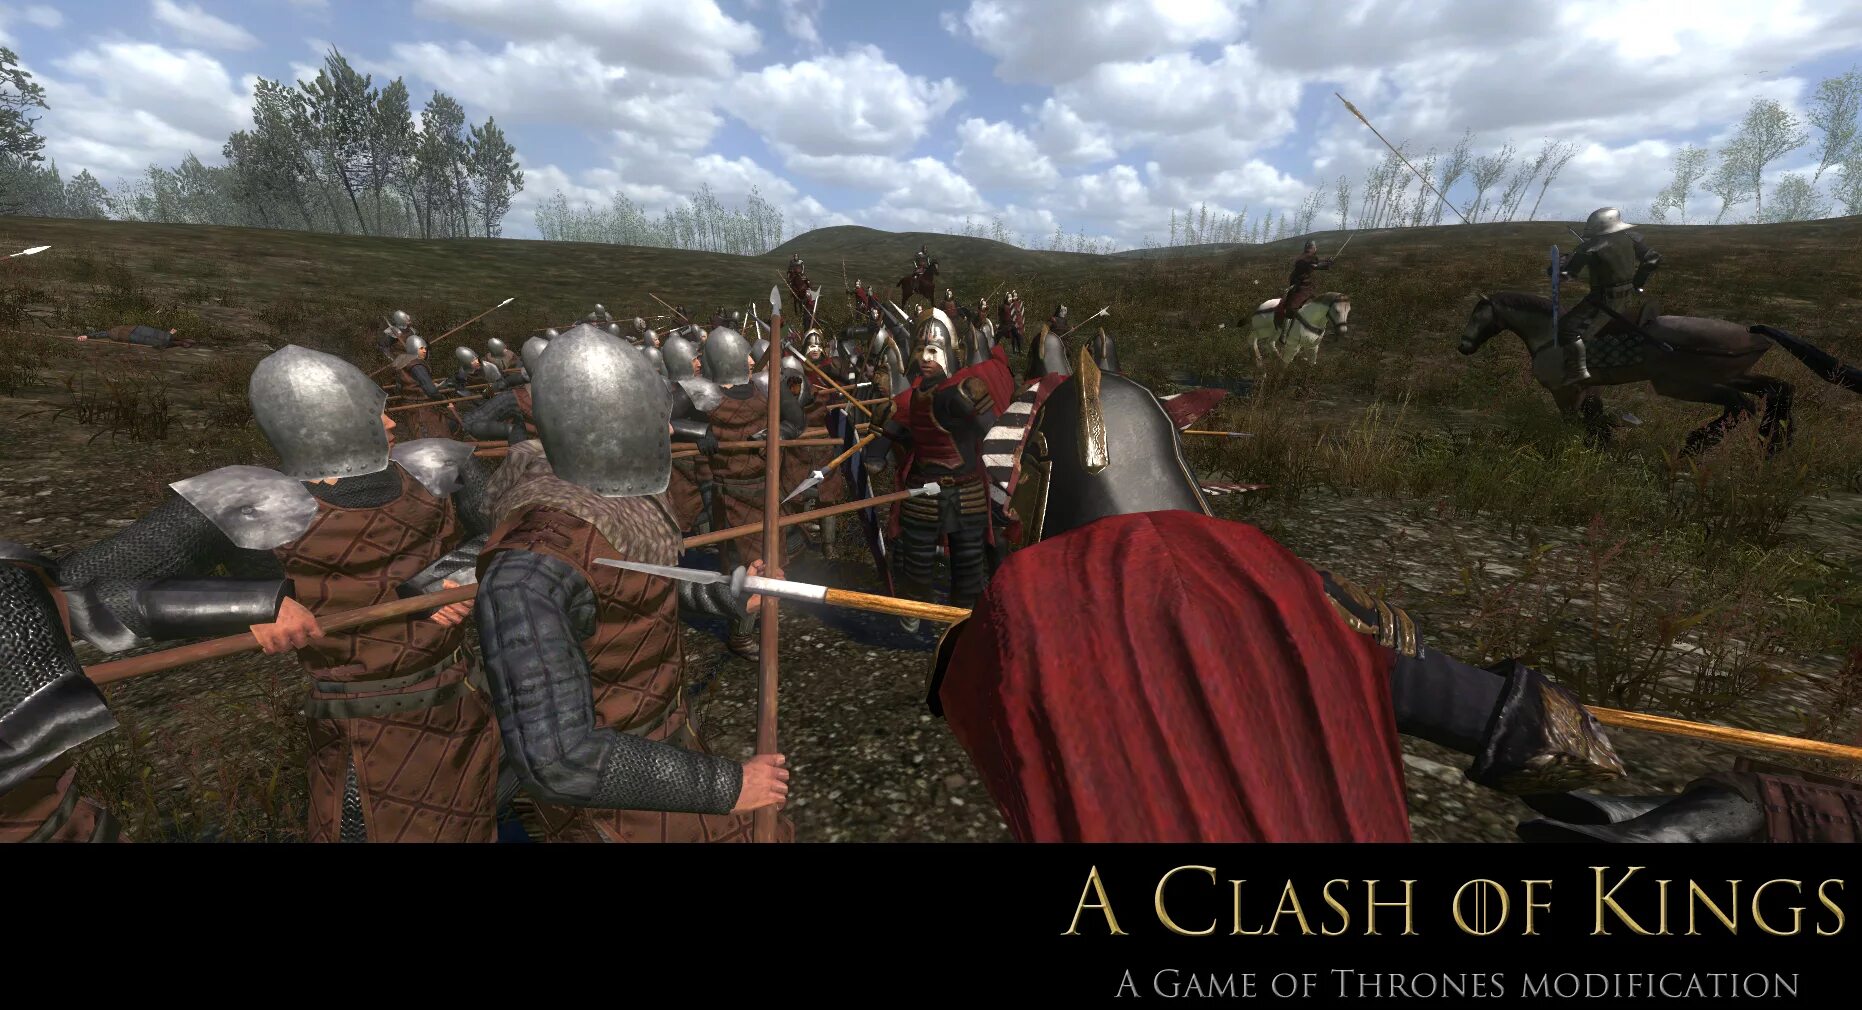 Mount and Blade: Warband – a Clash of Kings.